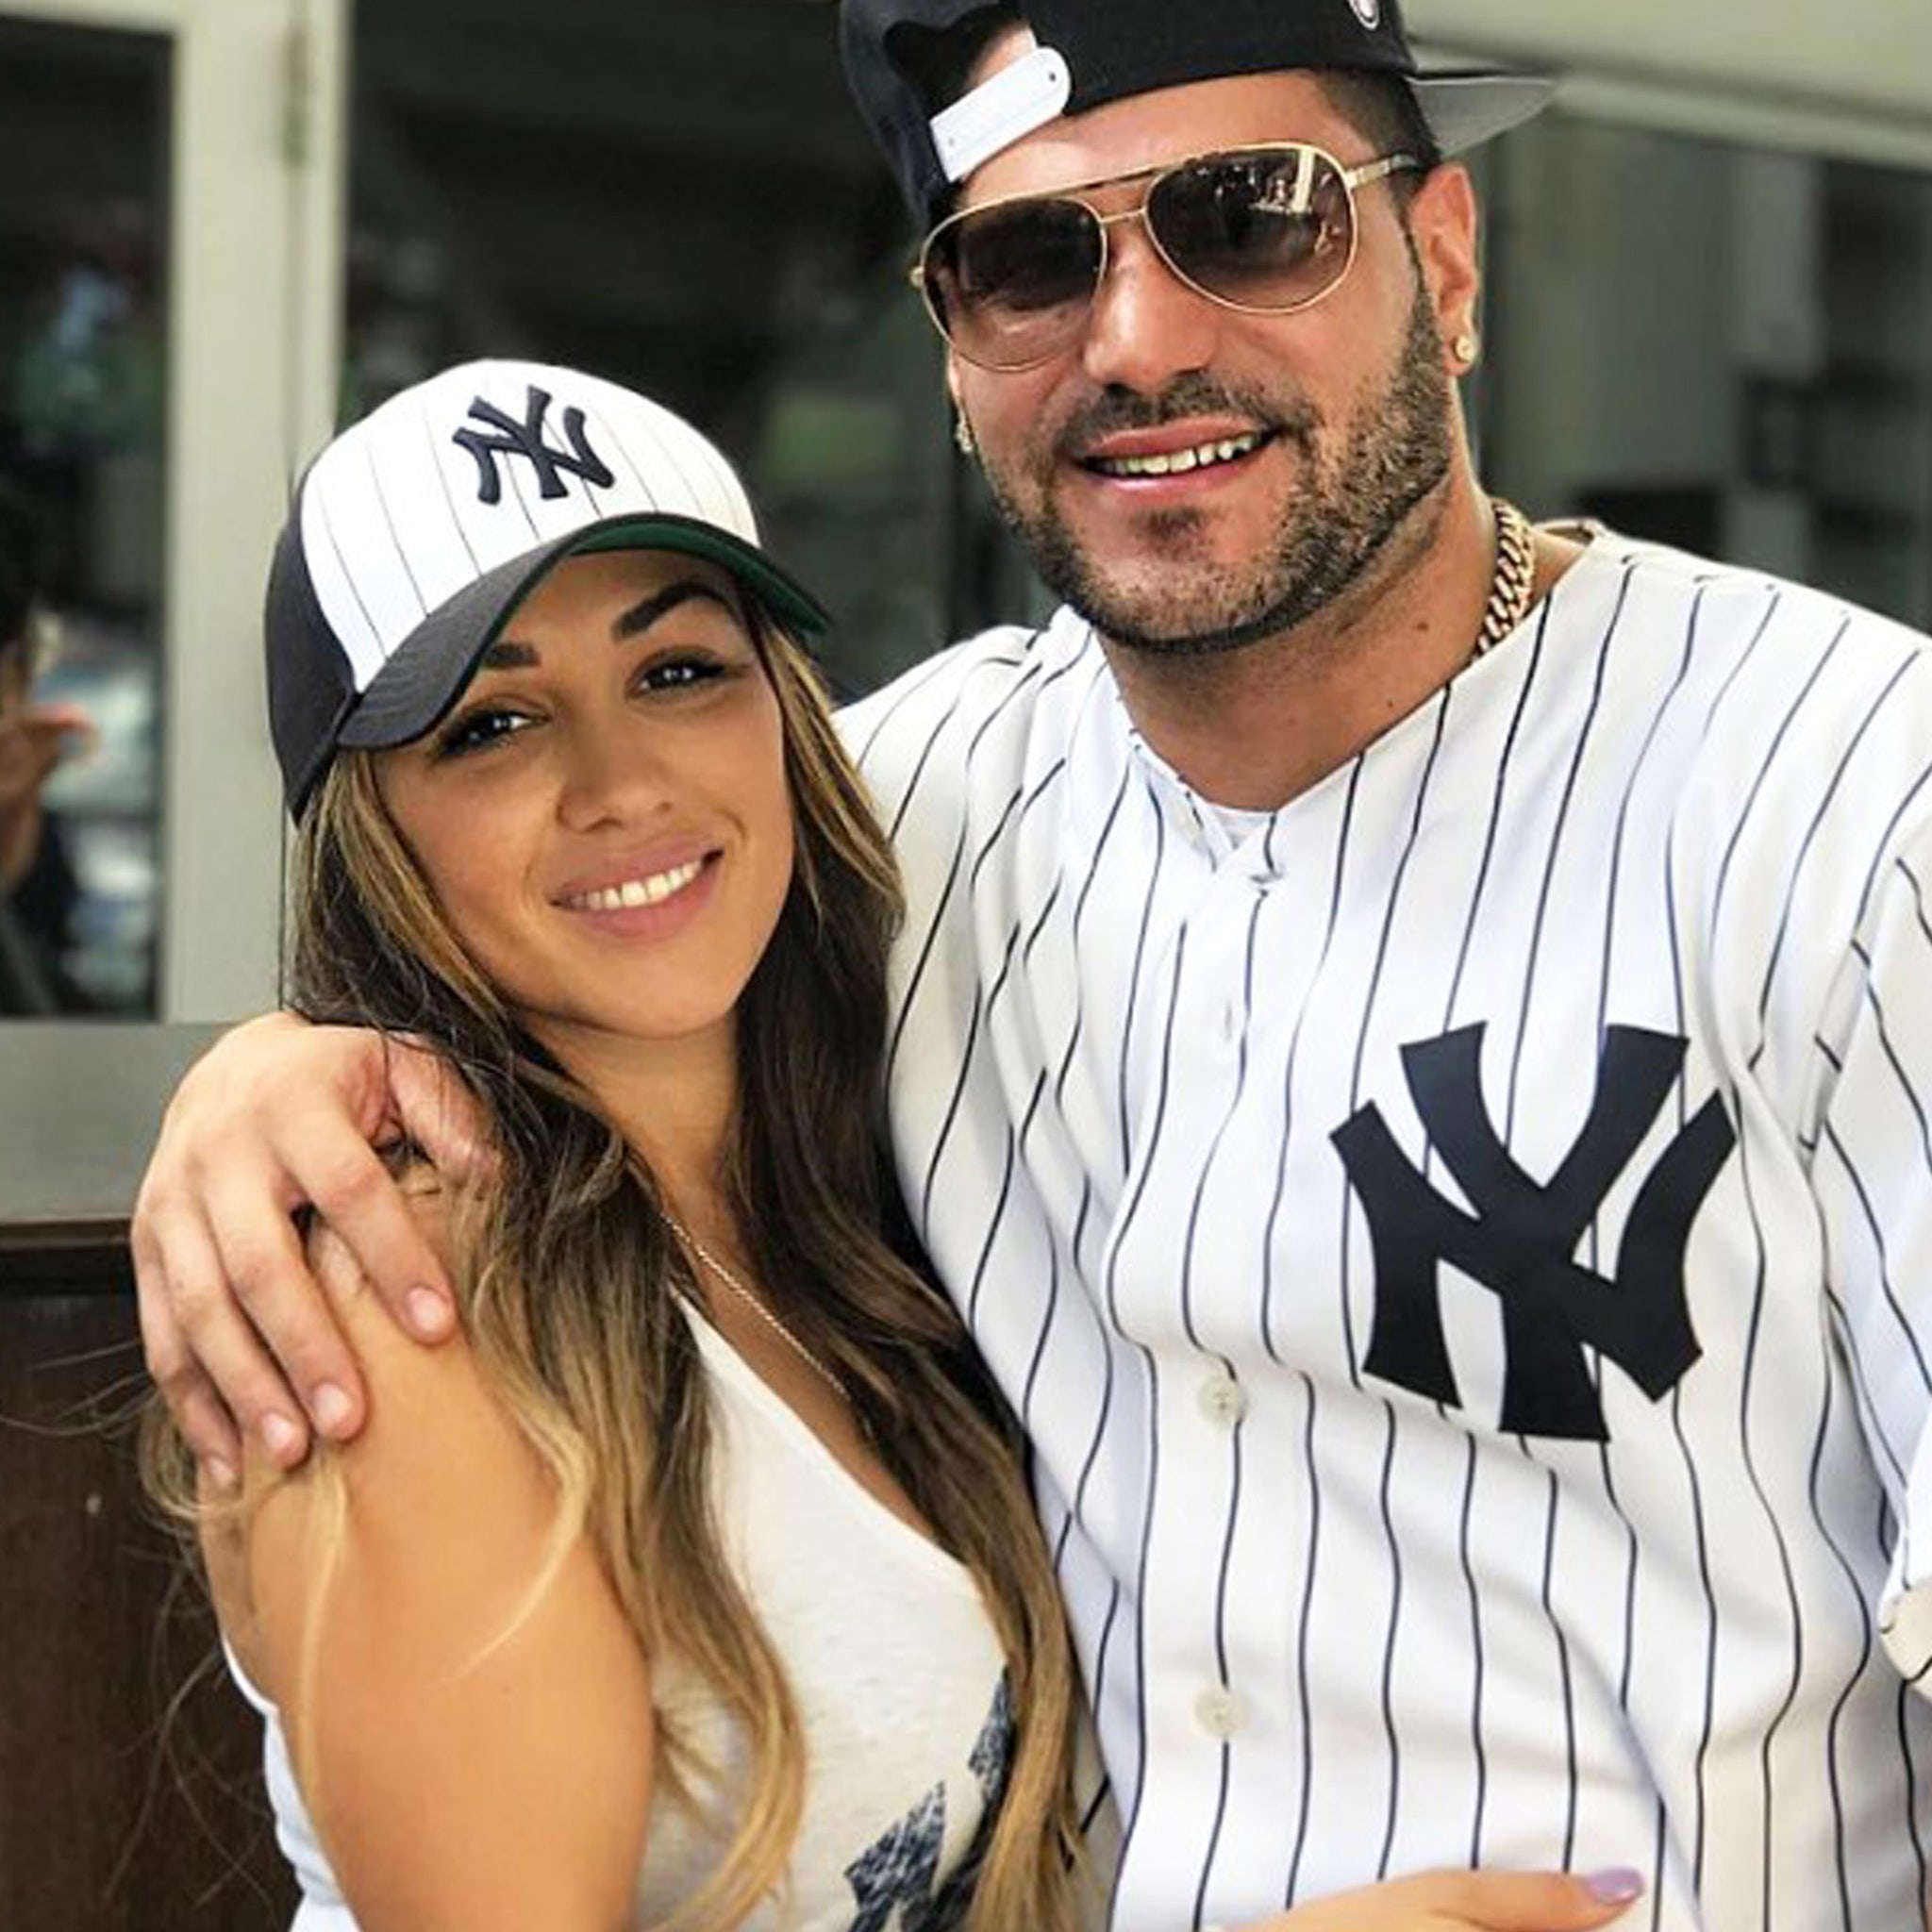 Ronnie Ortiz-Magro and Dean, his doppelganger, in an Instagram post